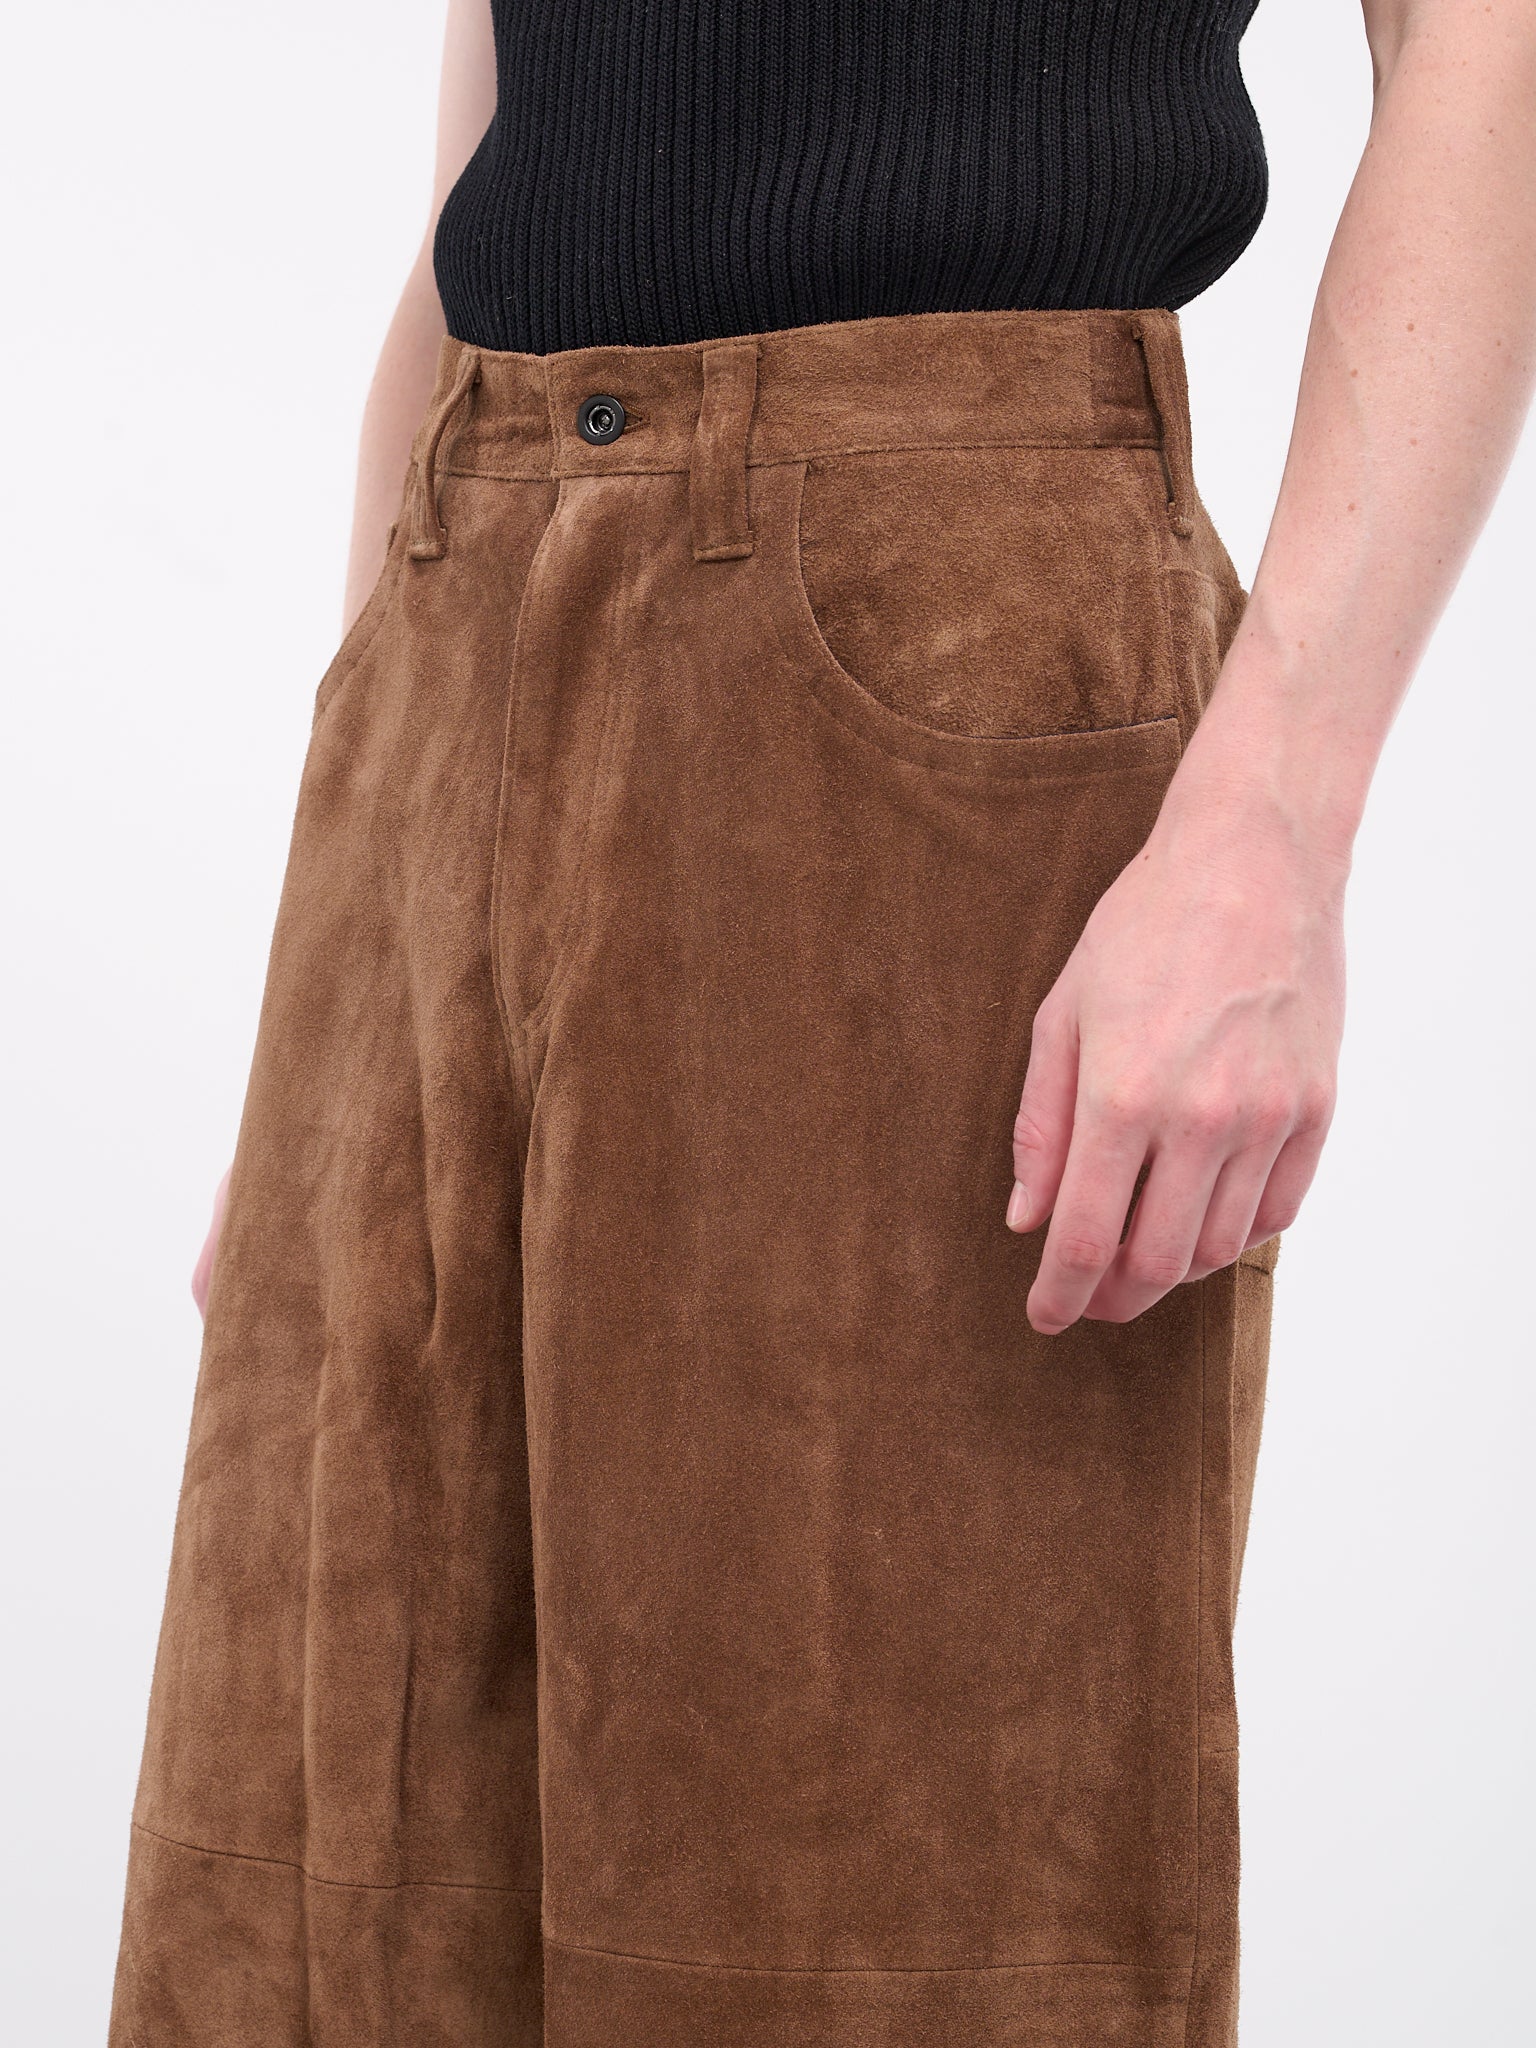 A LEATHER Suede Trousers | H. Lorenzo - detail 2